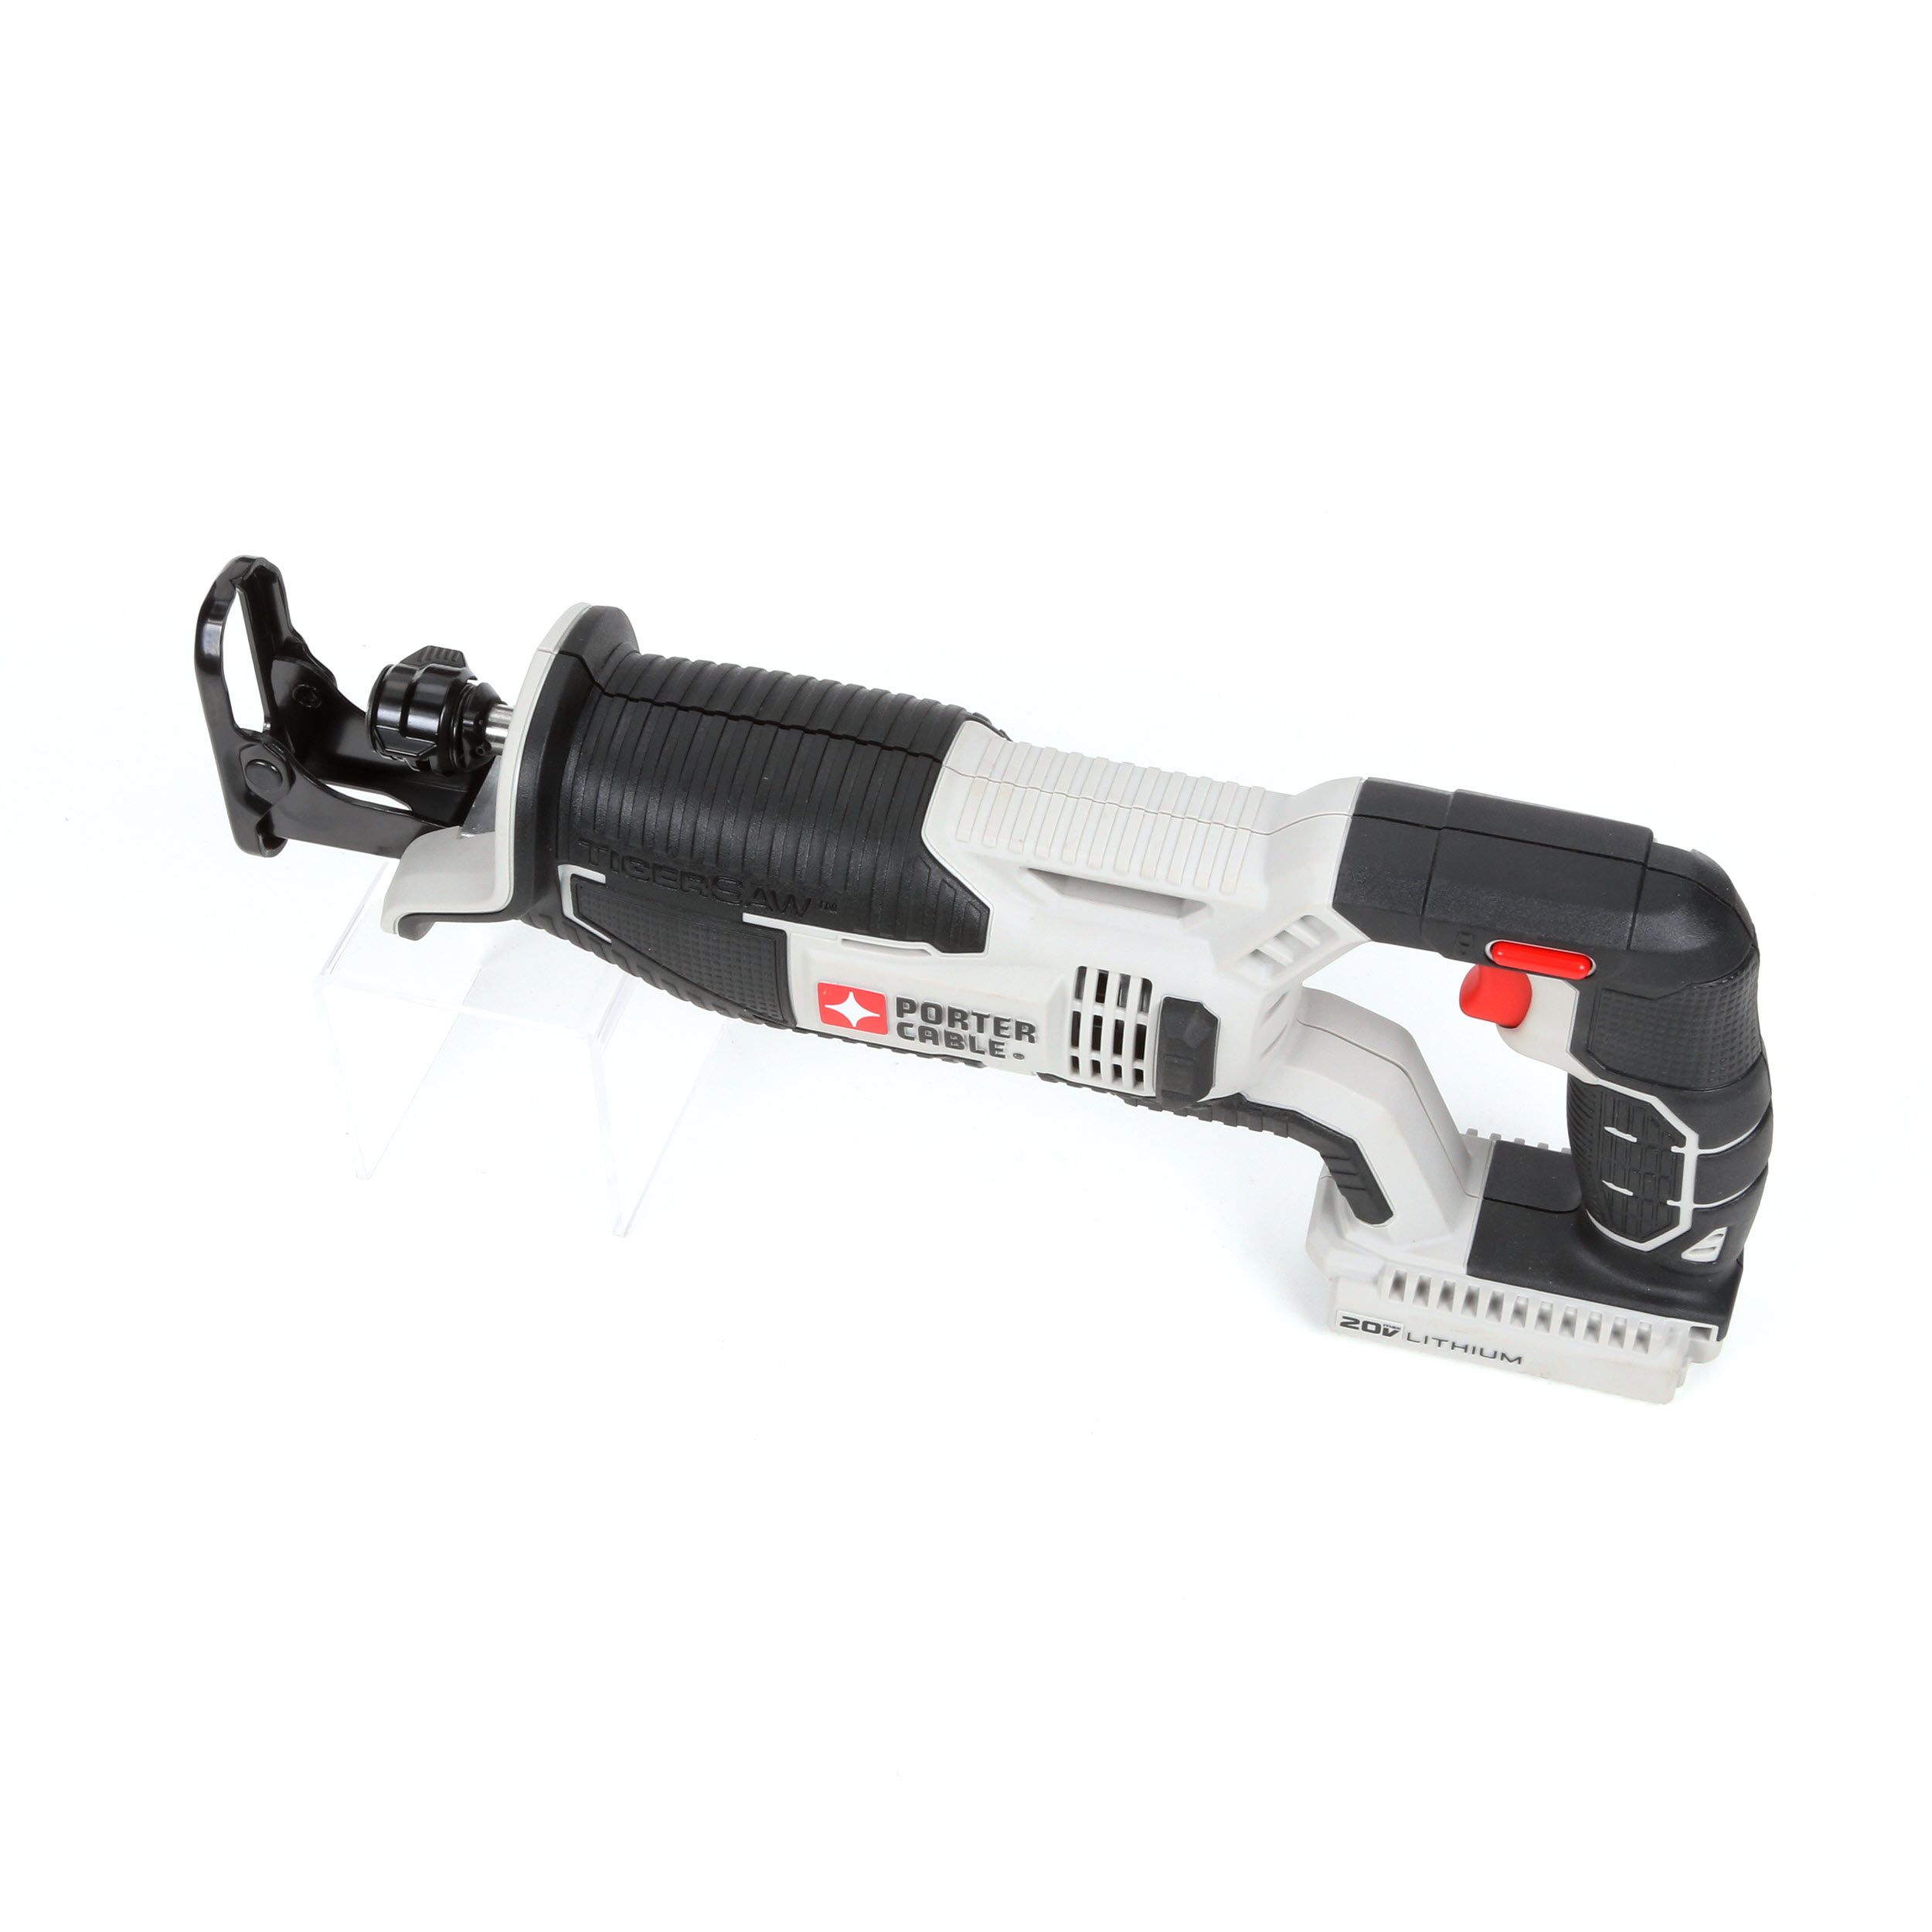 PORTER-CABLE PCC670B Reciprocating Tigersaw for sale online